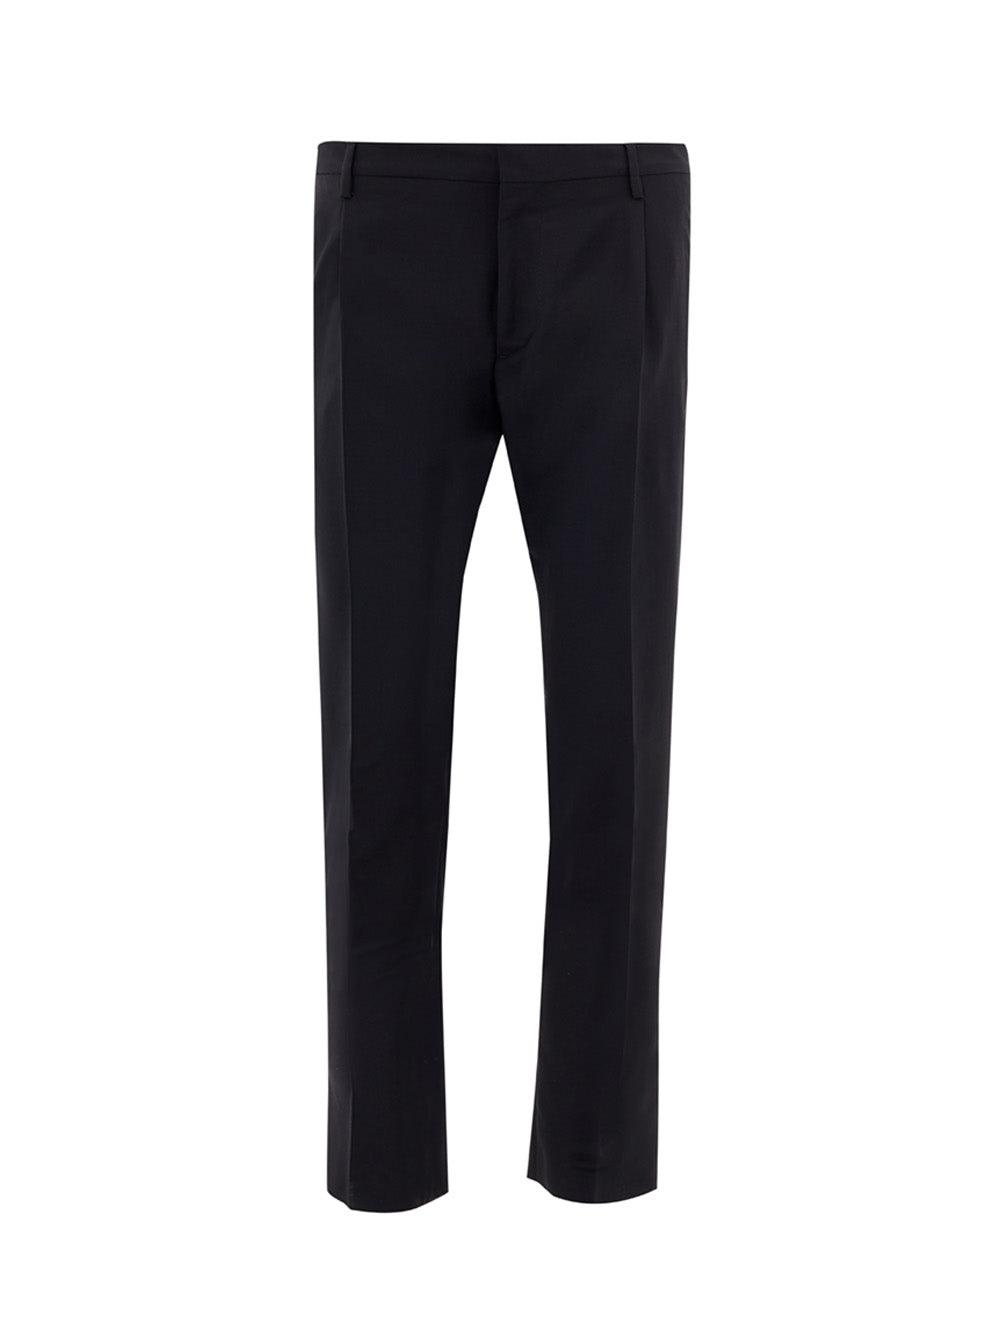 Valentino Tailored Wool Blend Blue Trousers - Ellie Belle